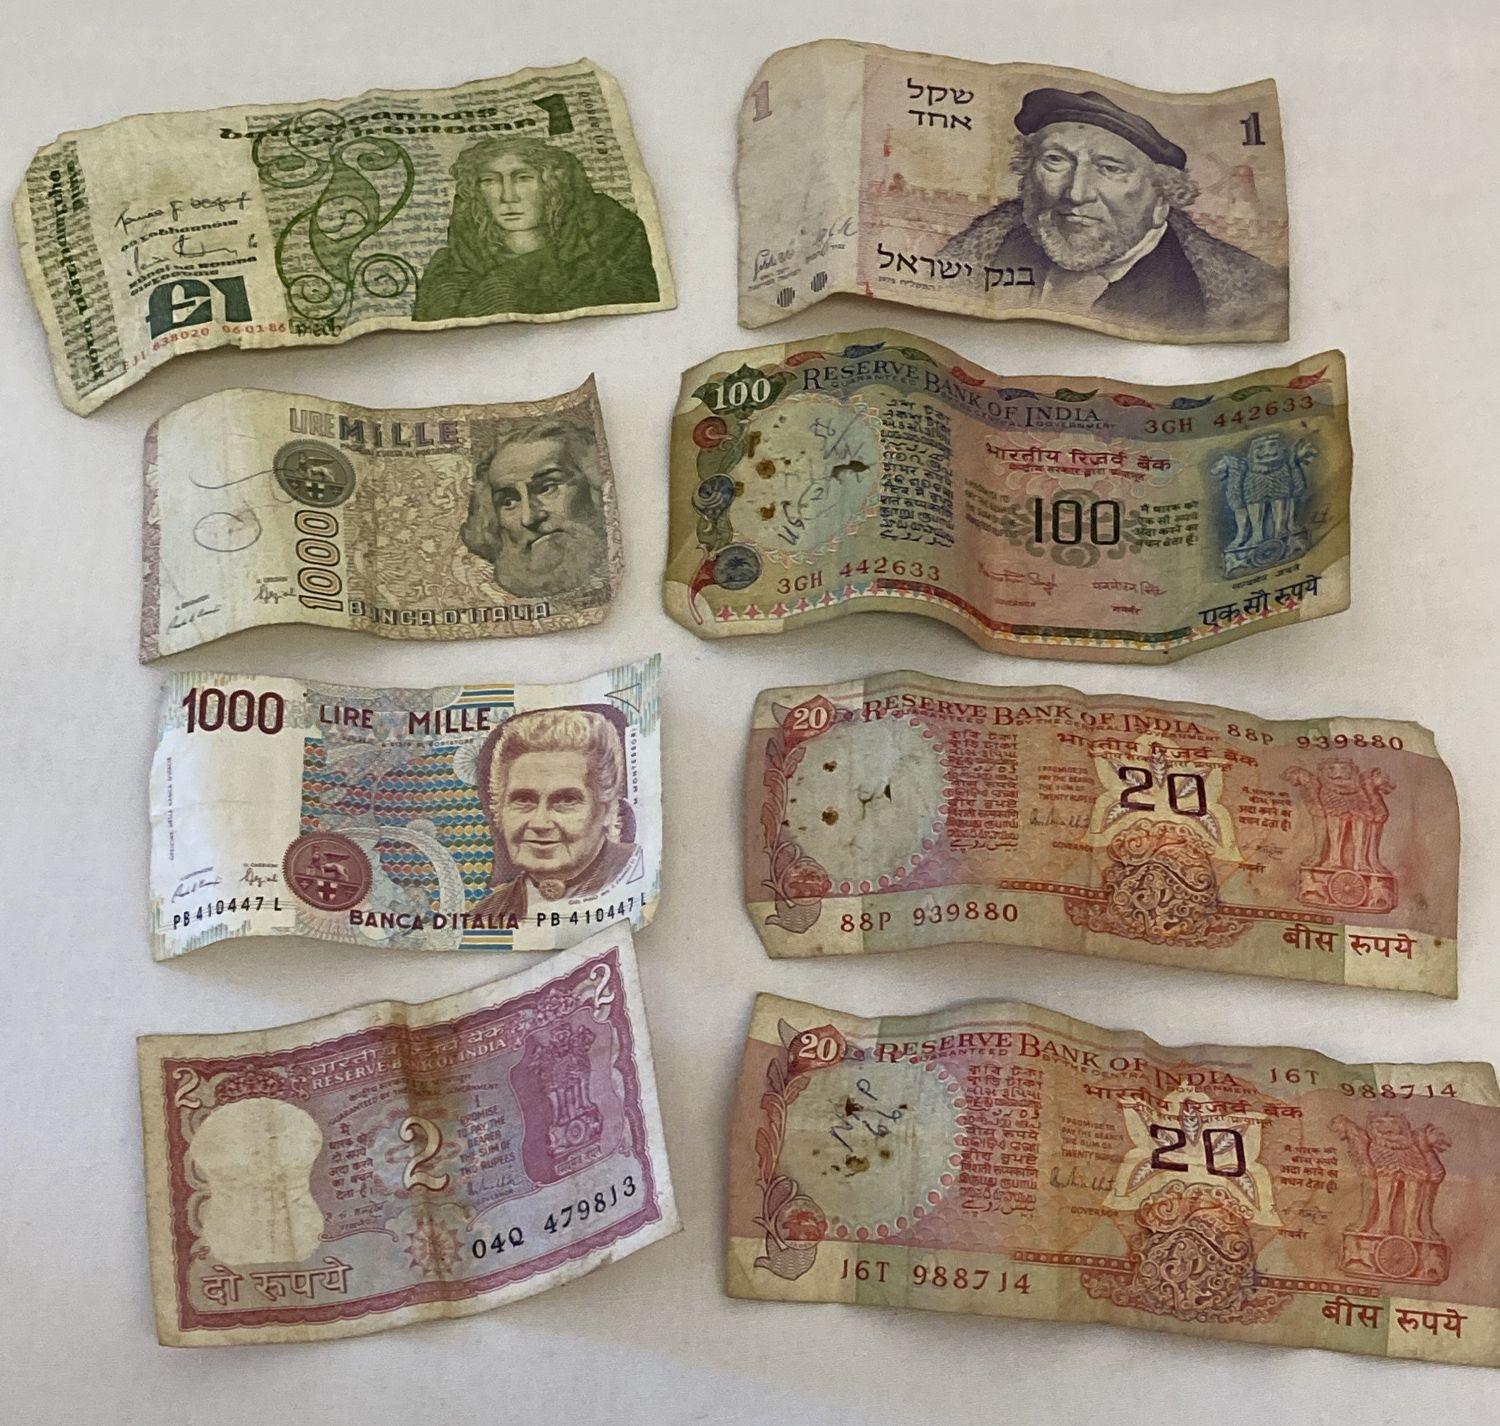 A collection of 8 vintage foreign bank notes from India, Israel, Ireland and Italy.